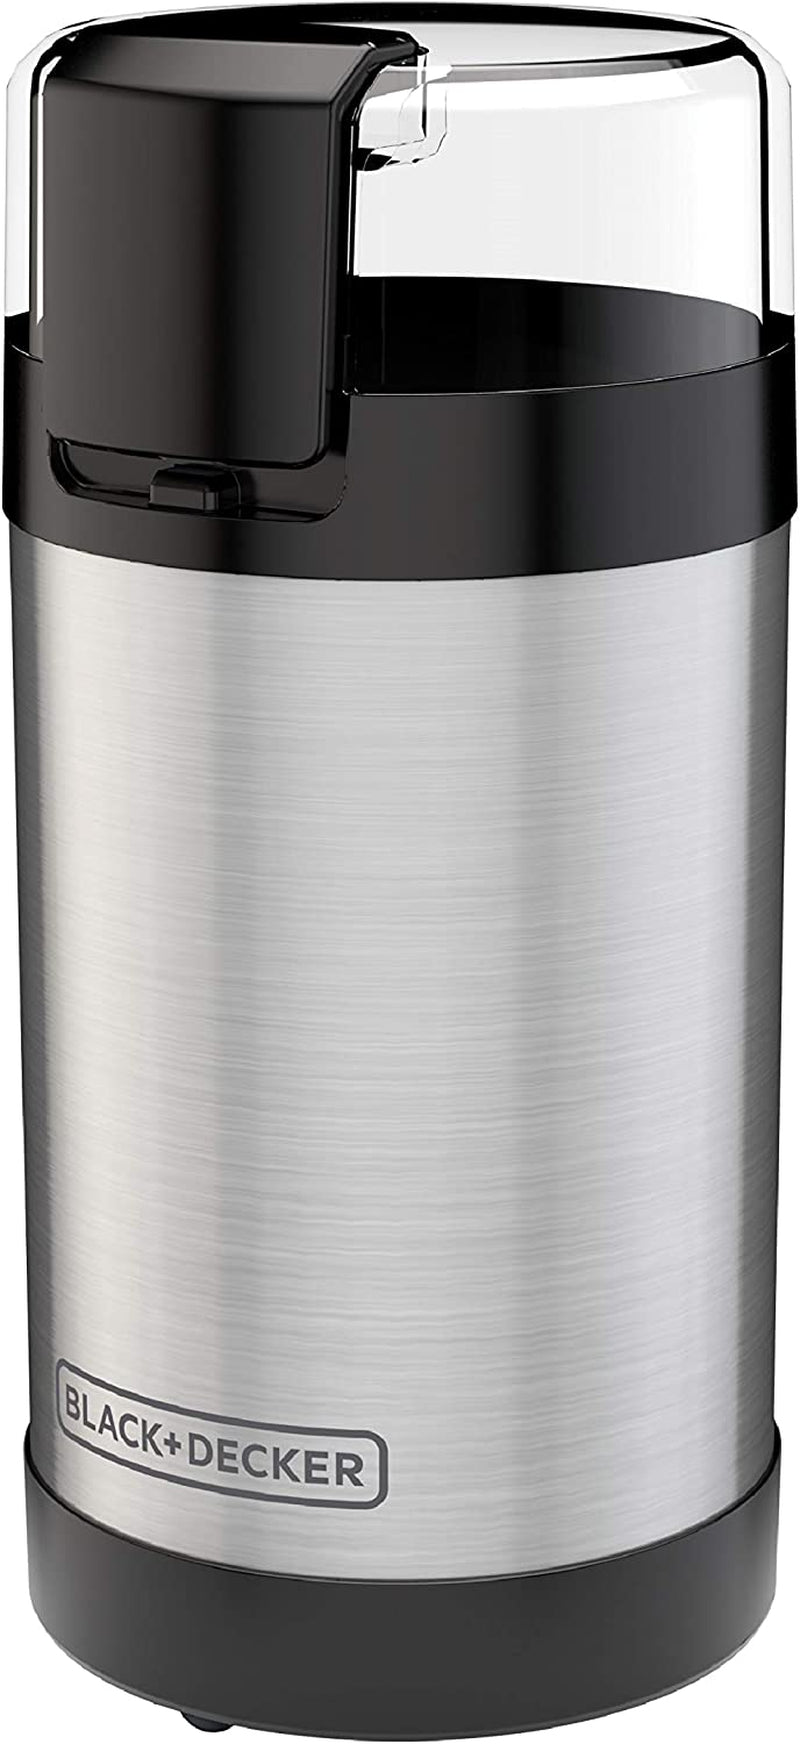 BLACK+DECKER One Touch Coffee Grinder, CBG110S,2/3 Cup Coffee Bean Capacity, Push-Button Control, Stainless Steel Blades